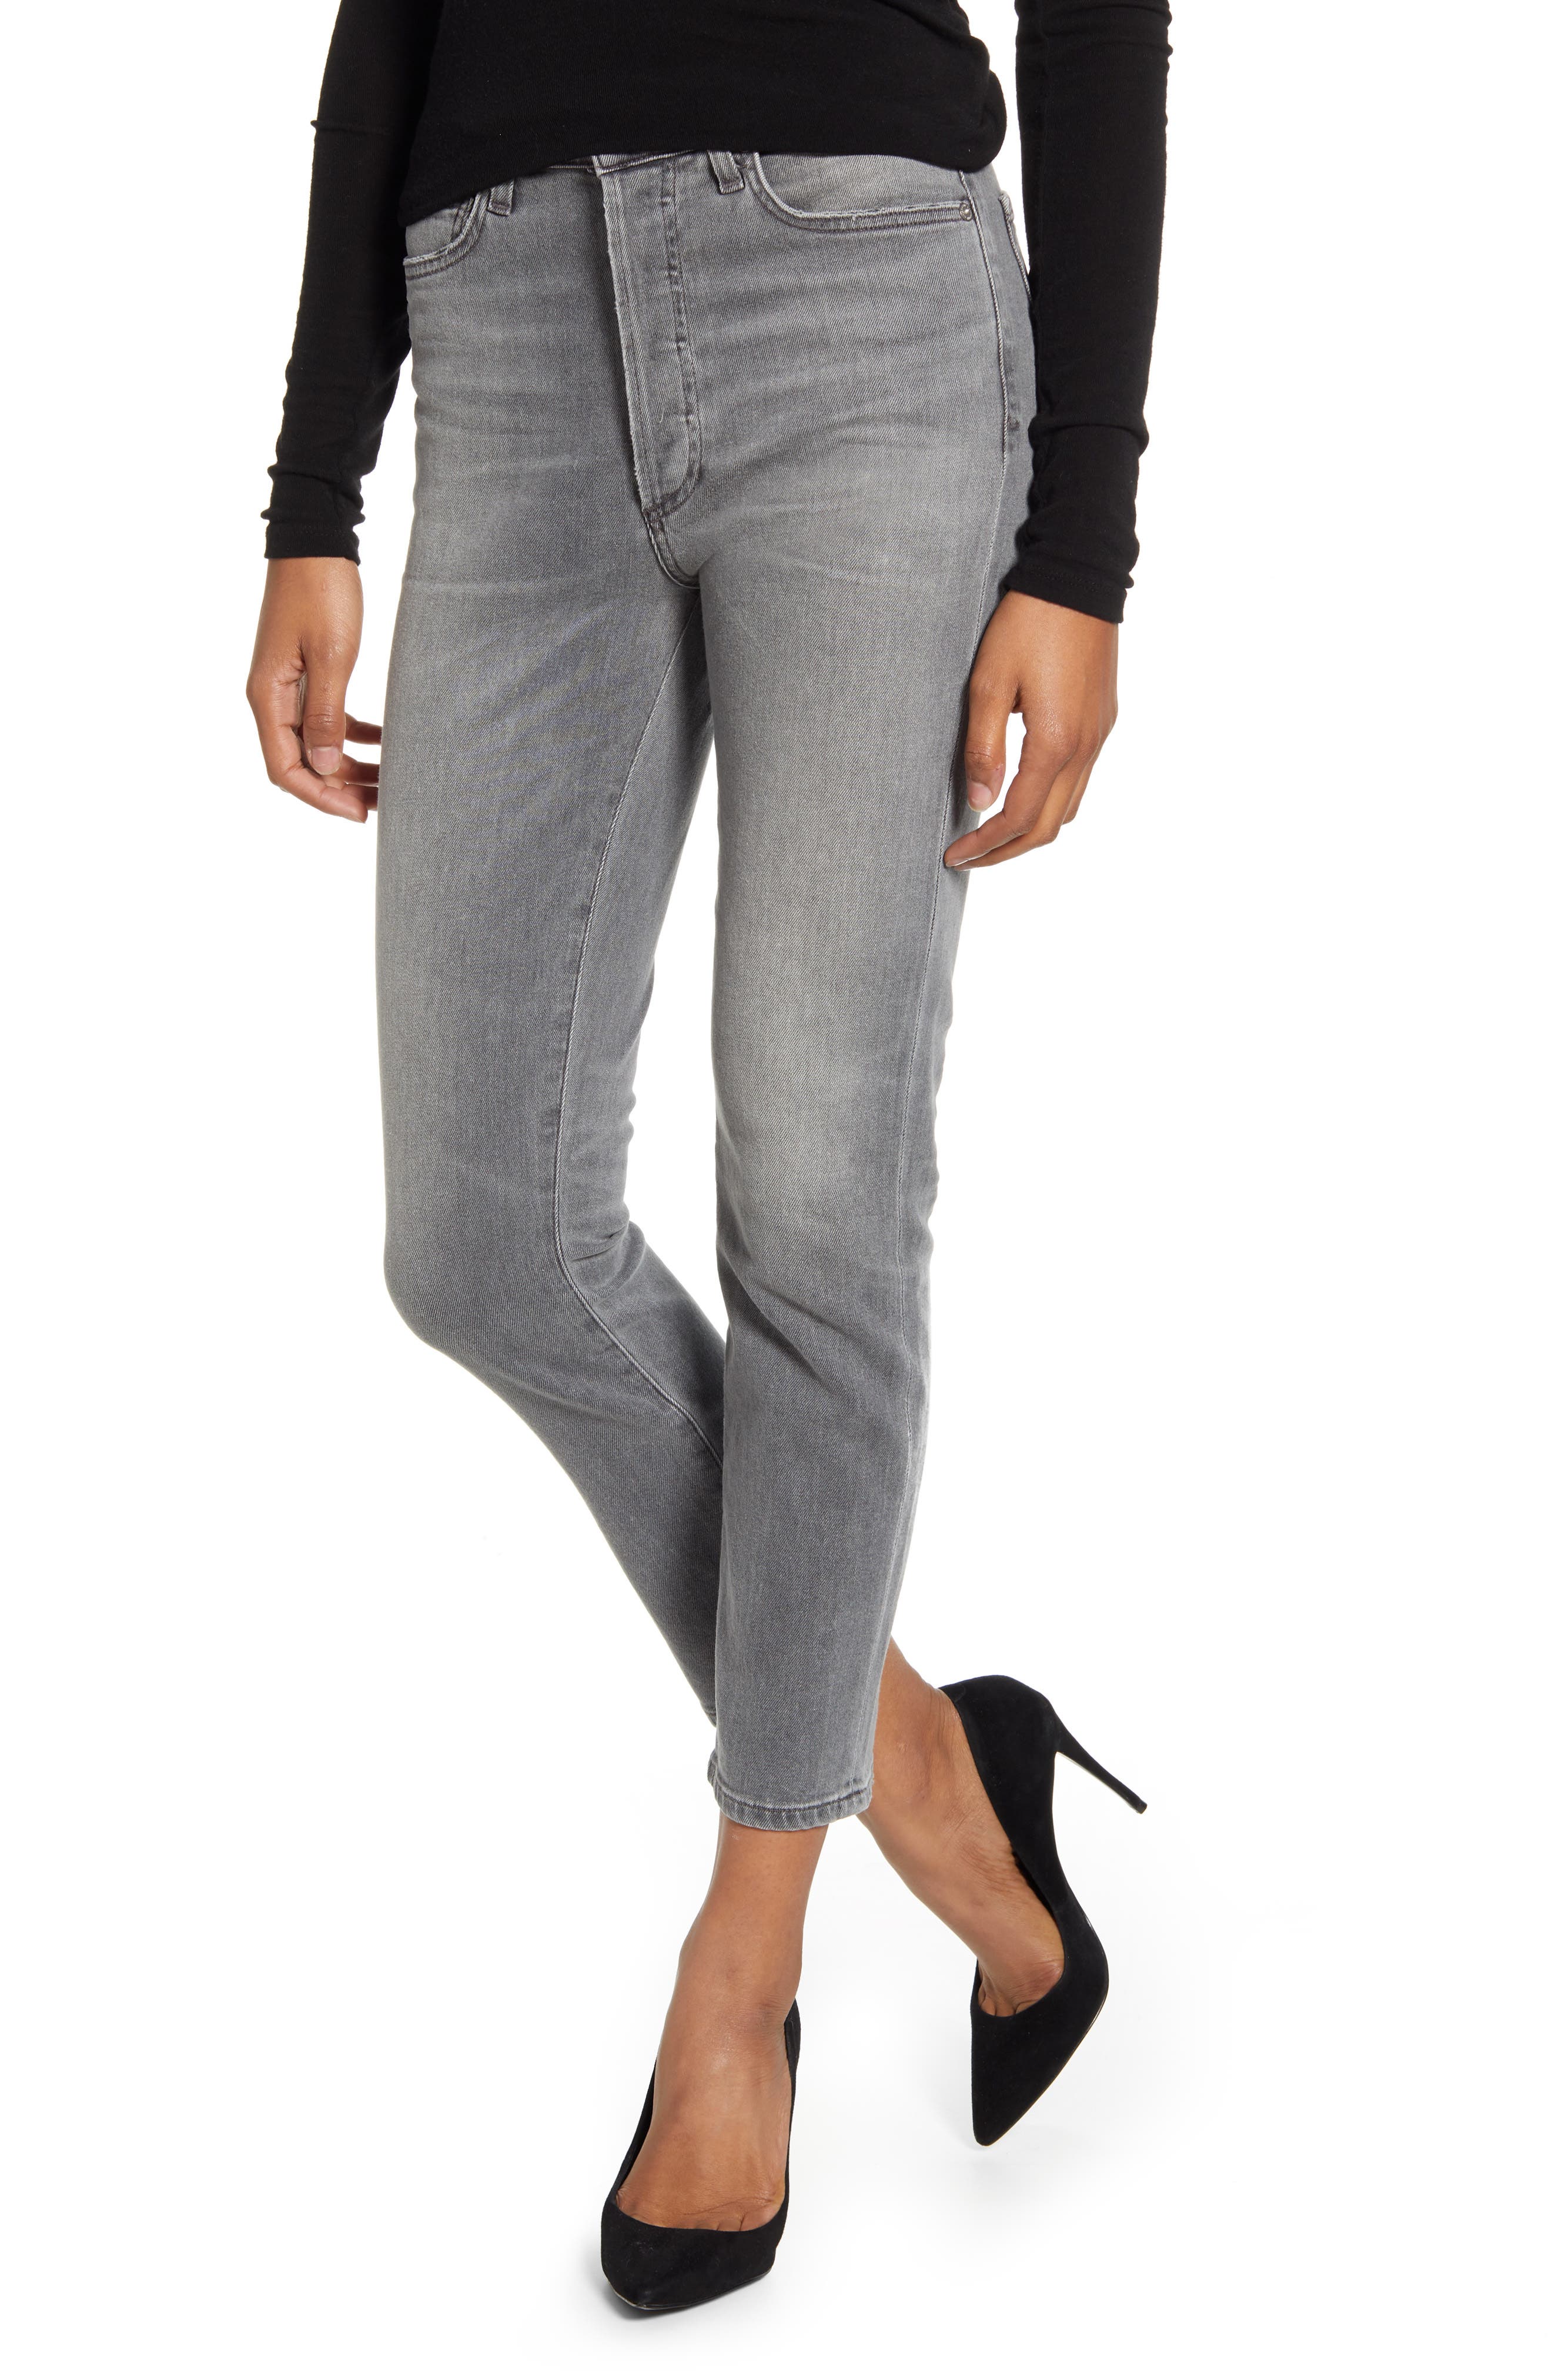 citizens of humanity olivia crop high rise slim ankle jeans